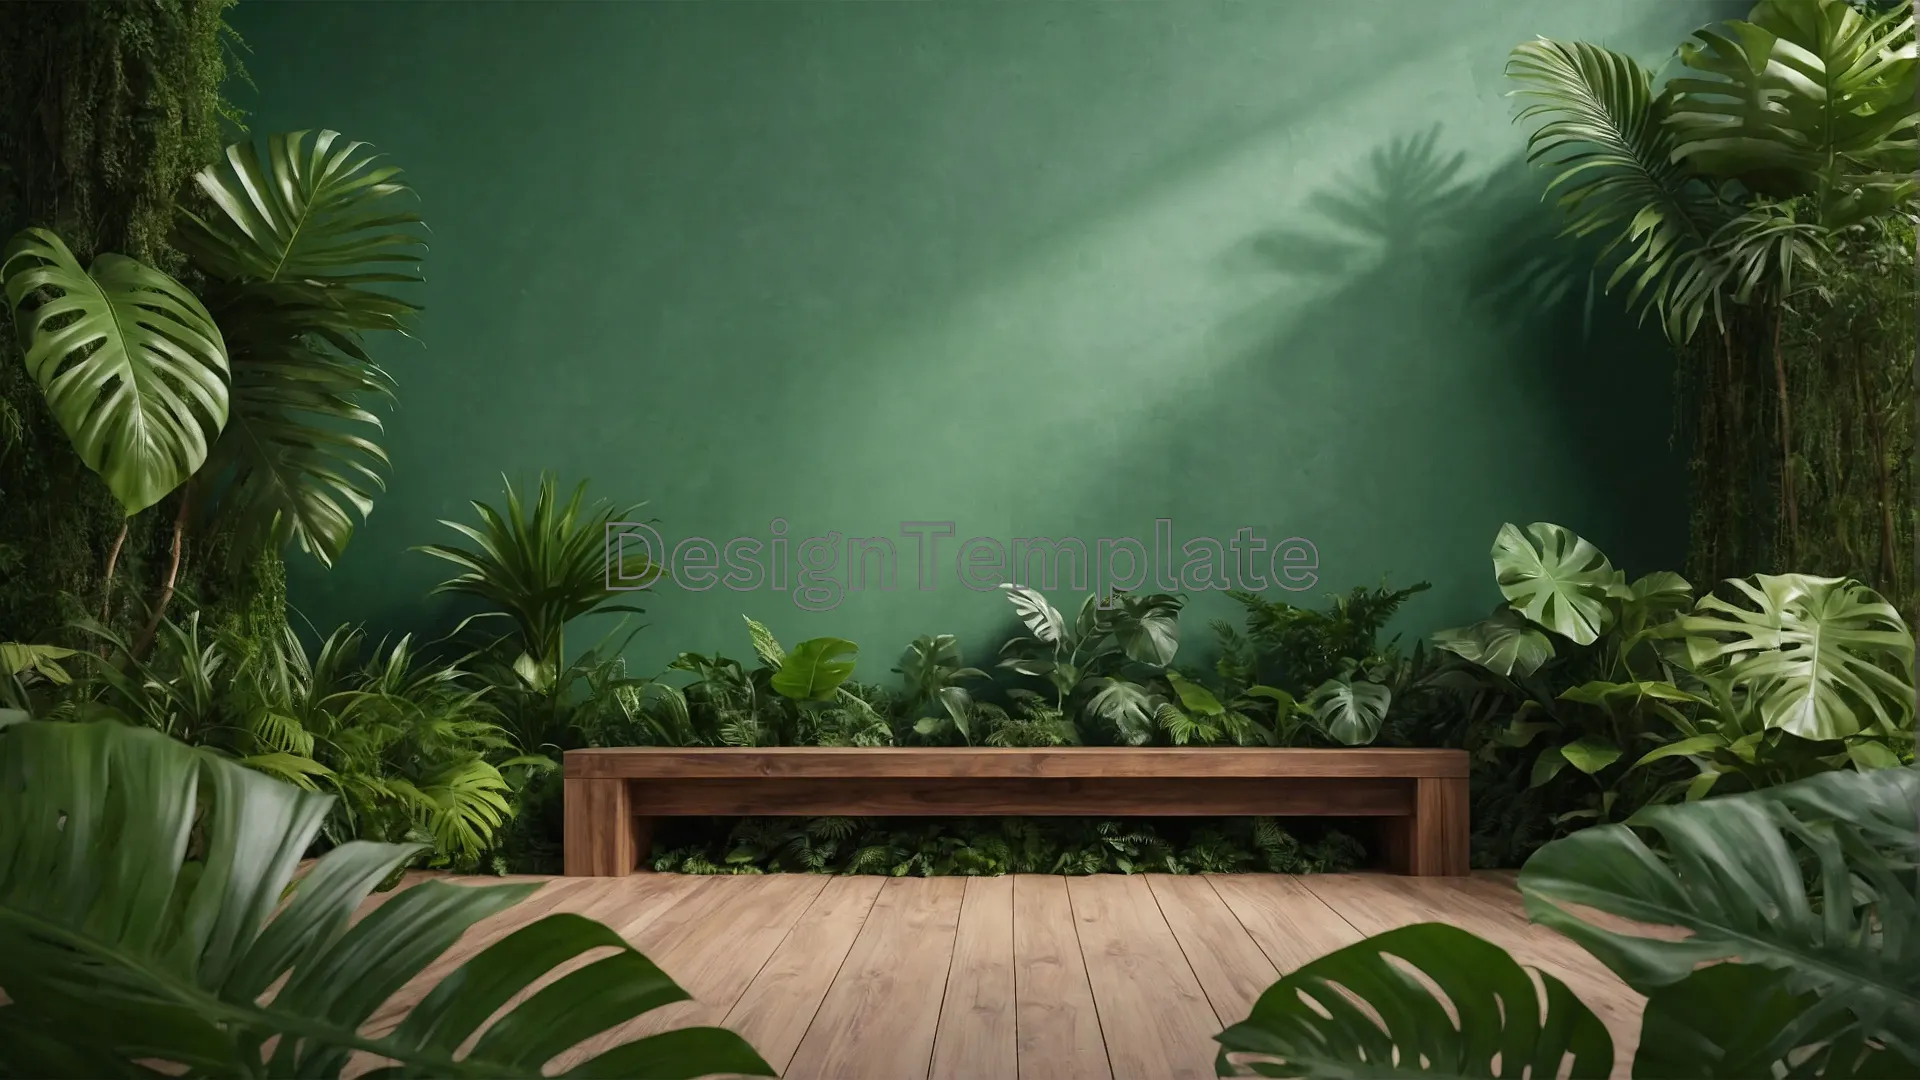 Relaxing Green Nook Peaceful Plant Environment Image